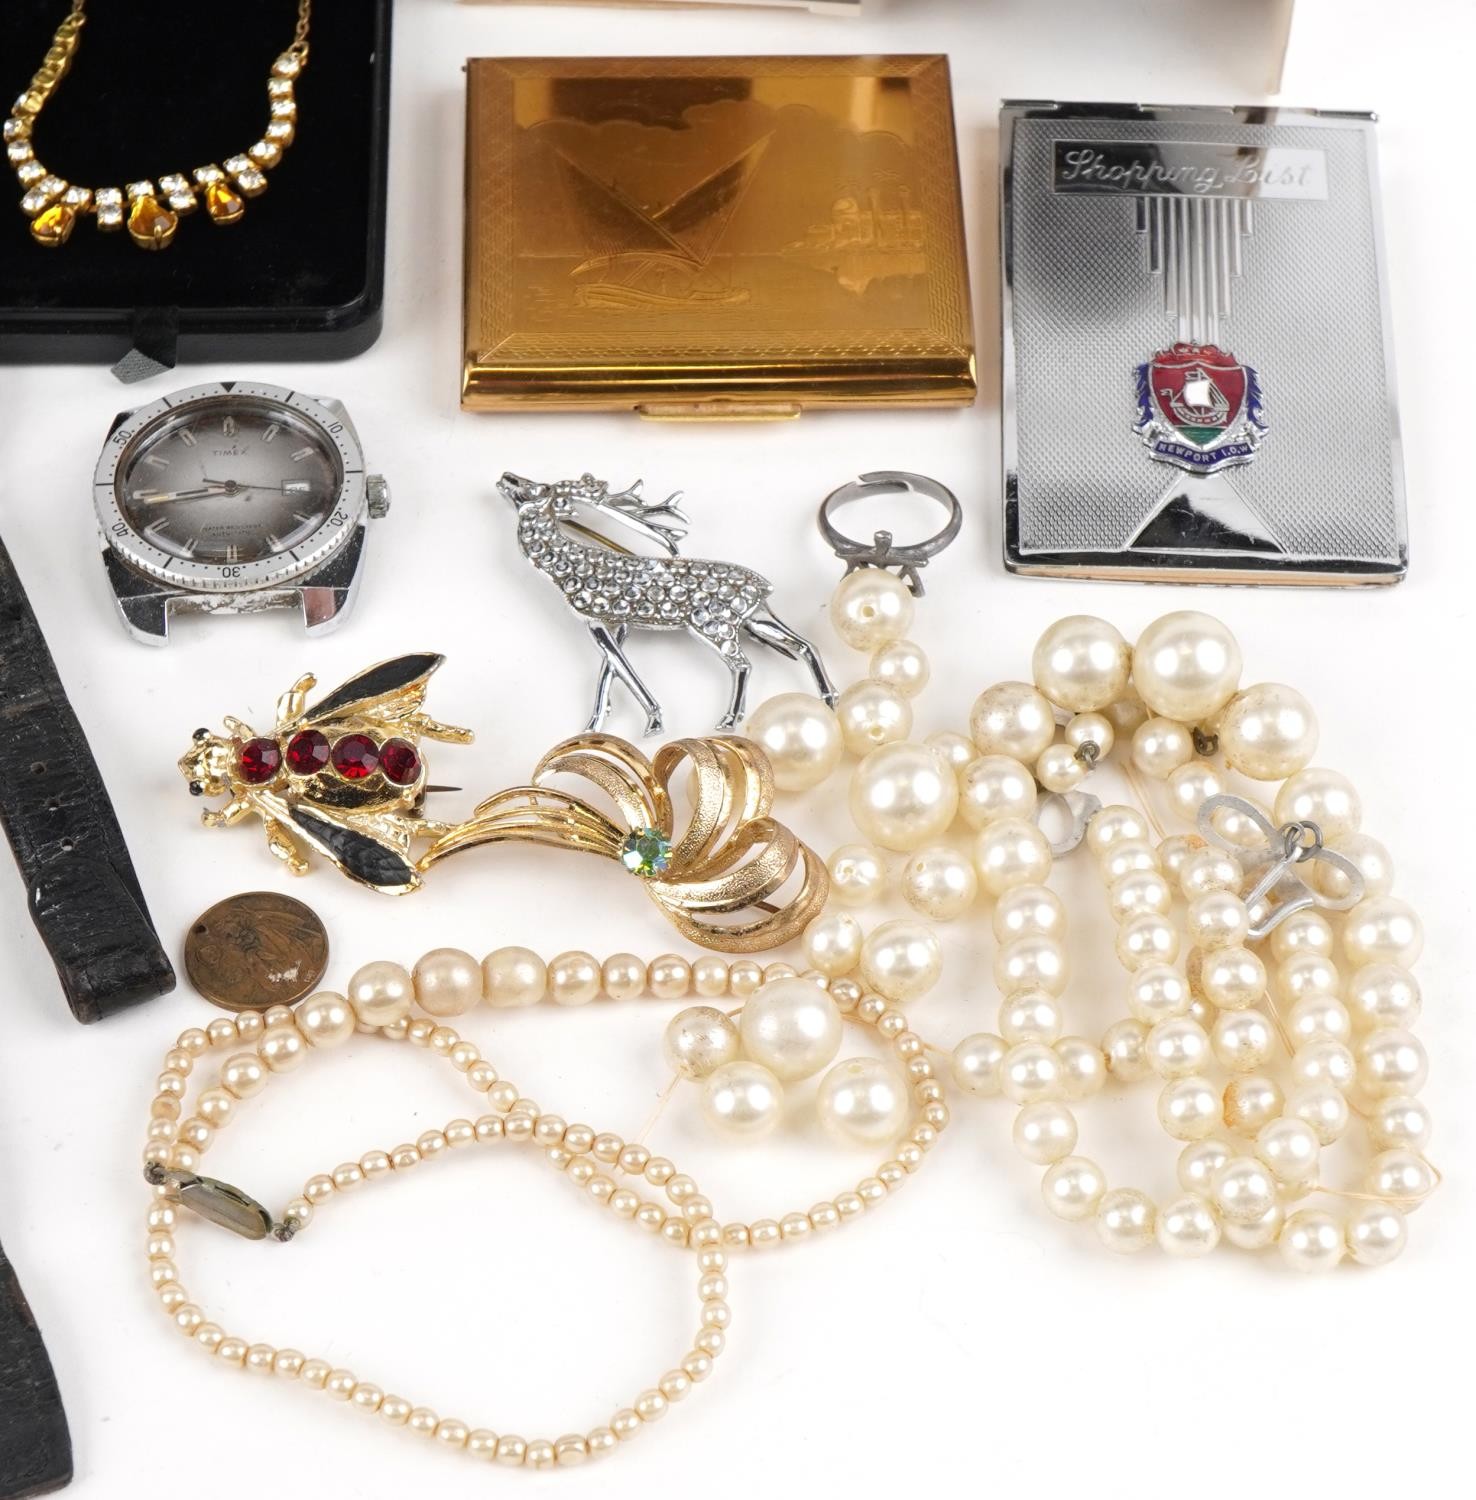 Vintage and later costume jewellery and wristwatches including necklaces, brooches and cufflinks - Image 5 of 5